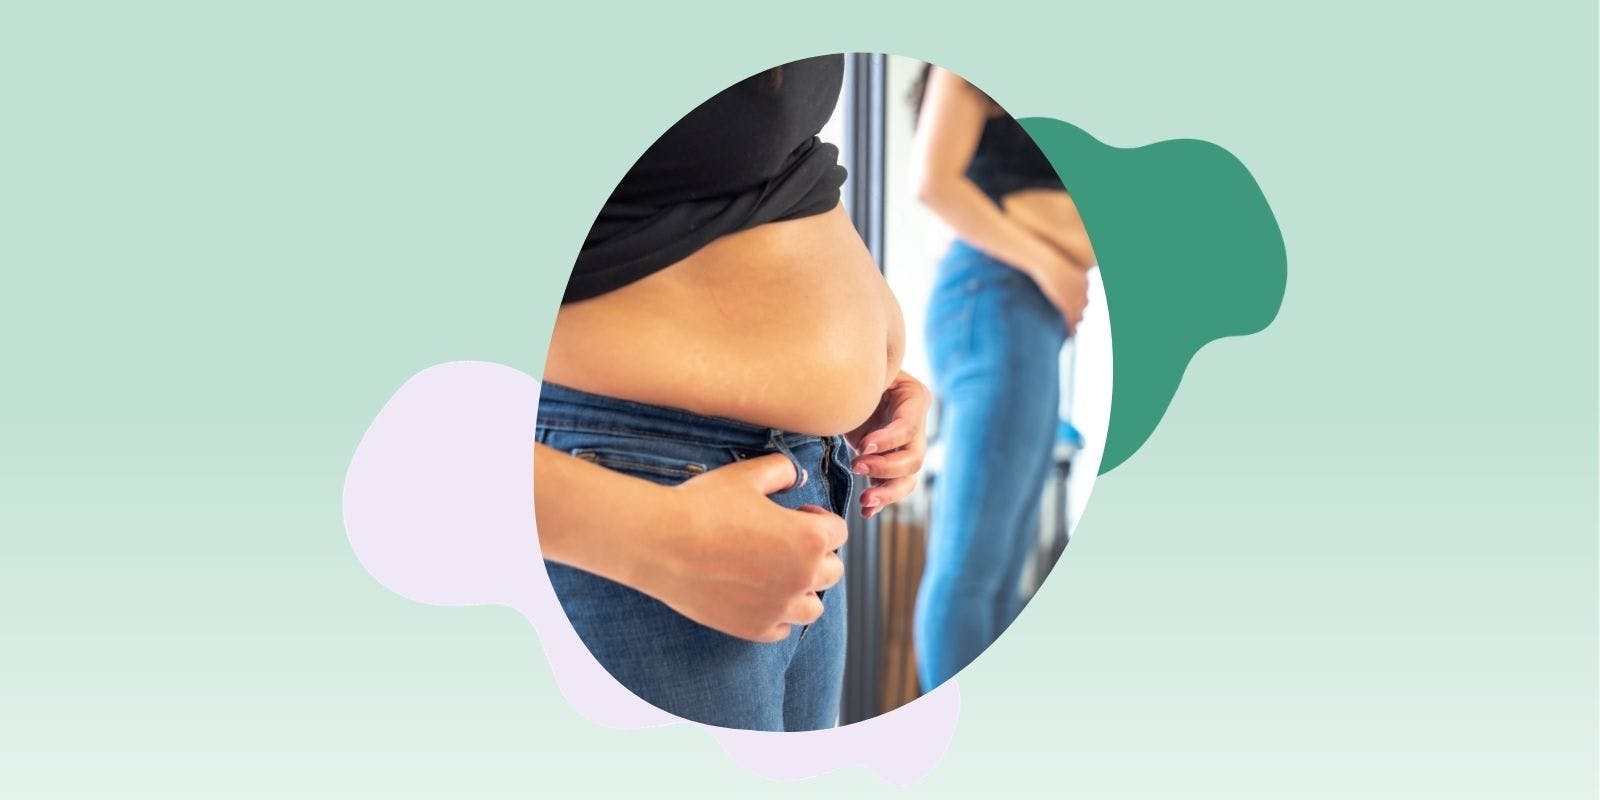 Bodily Changes: From Pregnancy To Postpartum